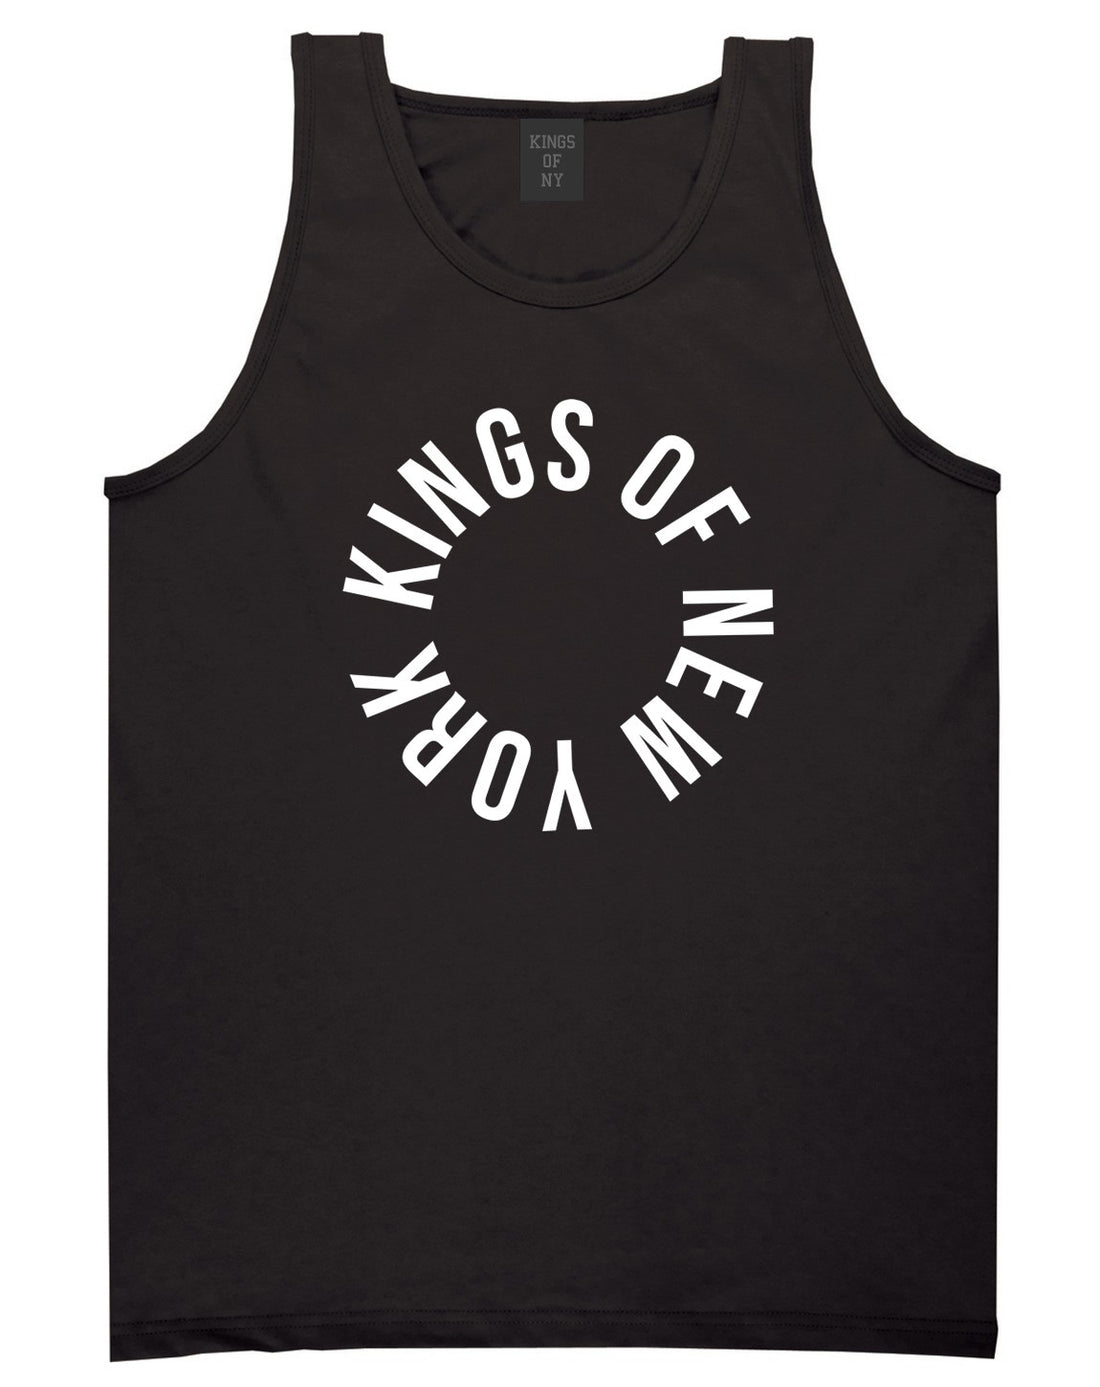 Kings Of NY Circle Logo New York Round About Tank Top in Black